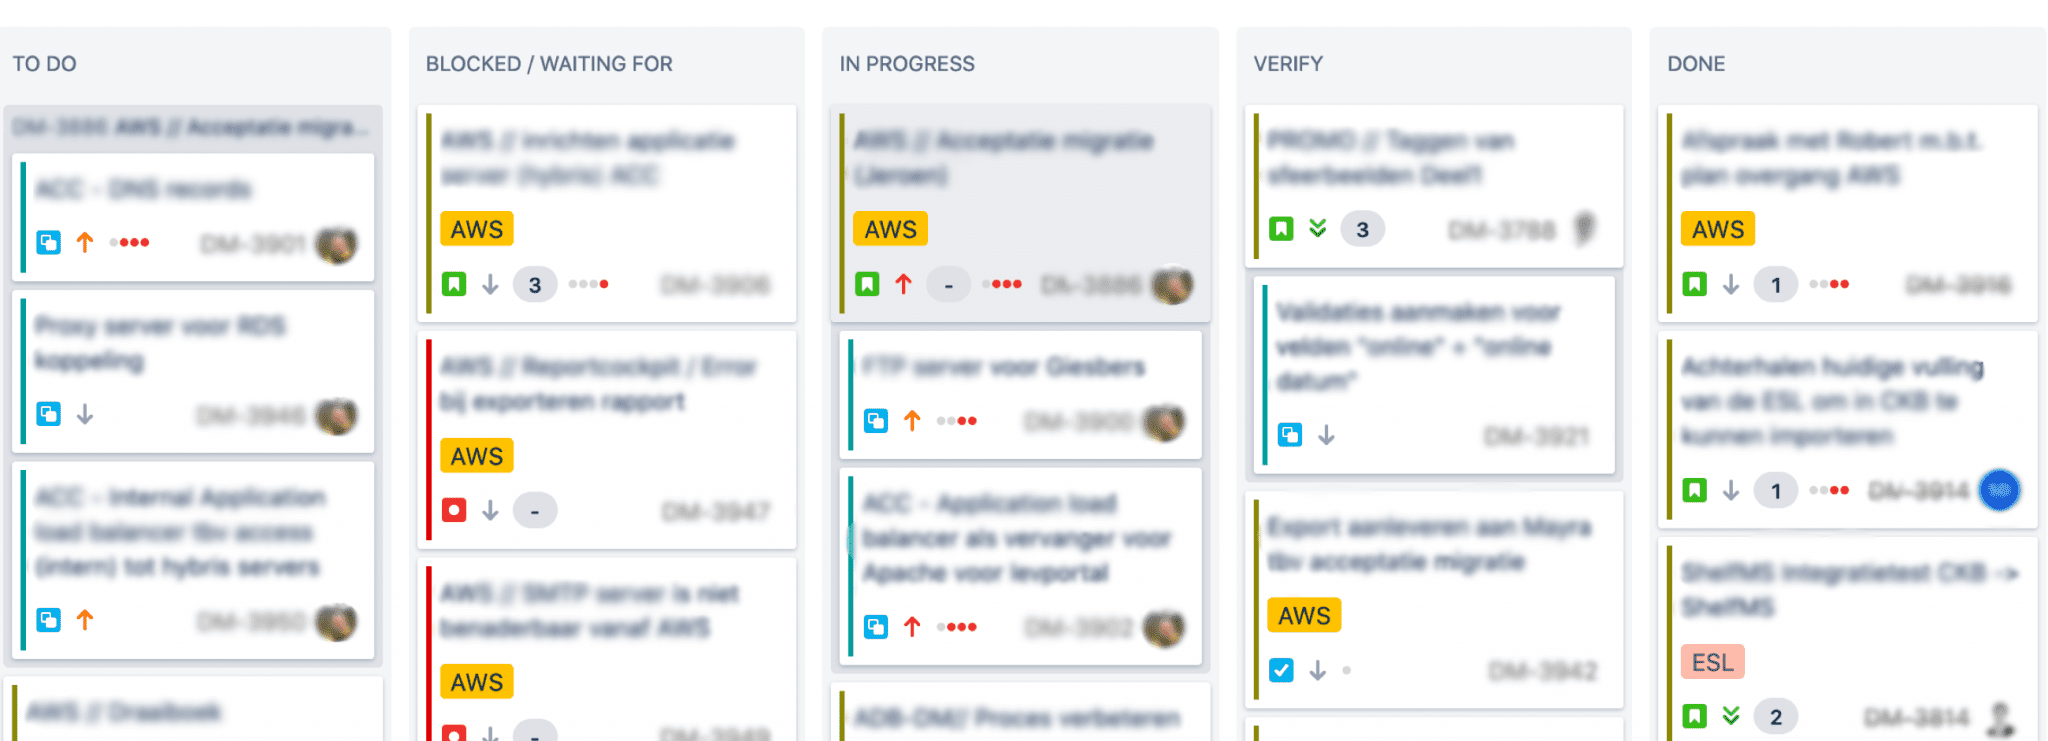 Developer? Do you use Scrum and Jira? Check this Jira workflow + boards ...